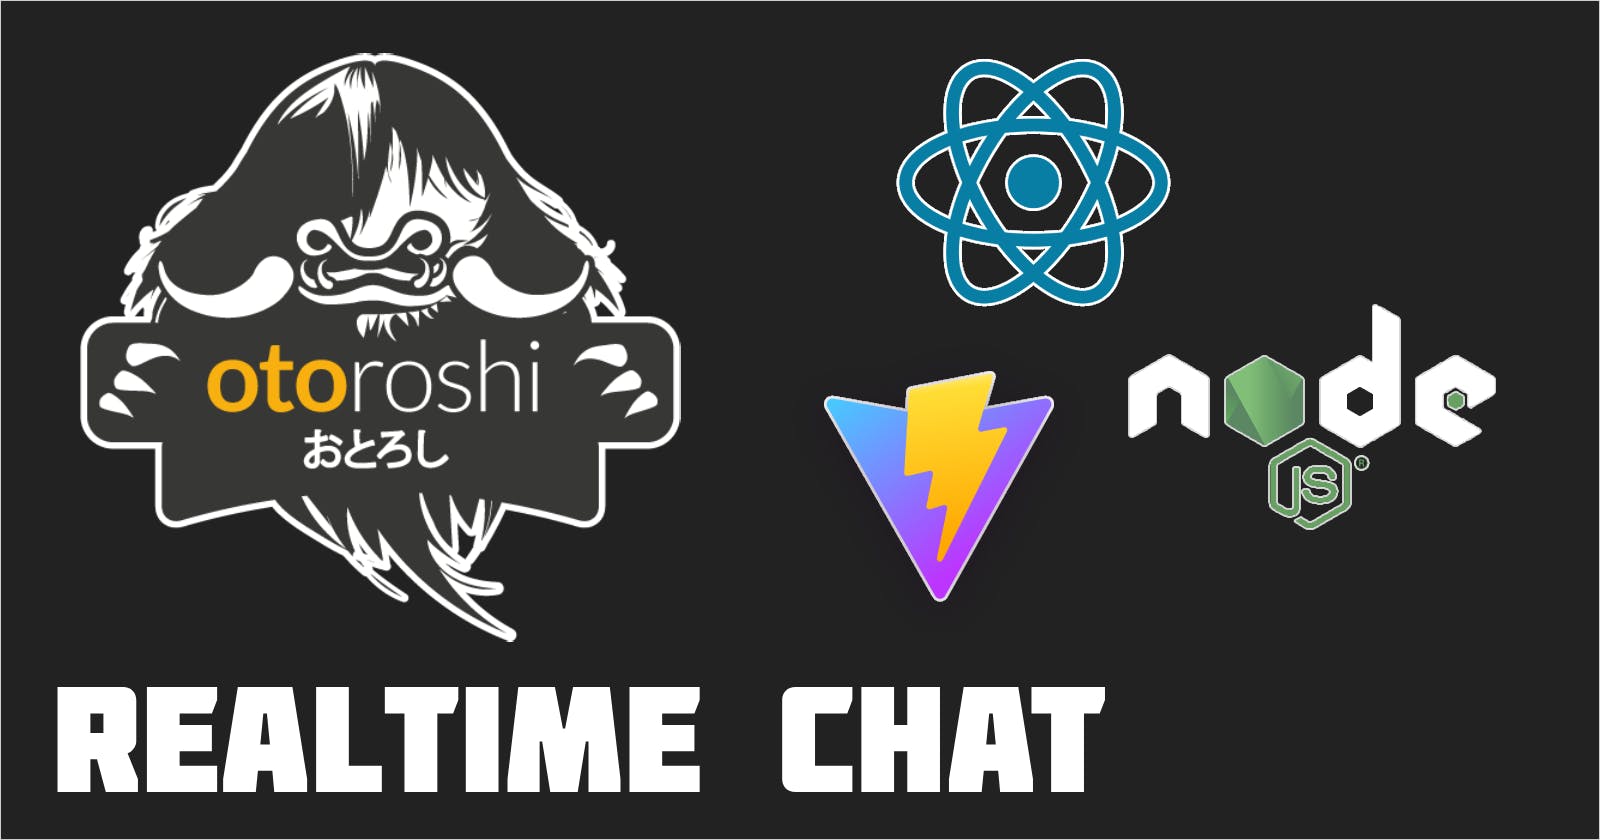 Building a Realtime Chat with Otoroshi